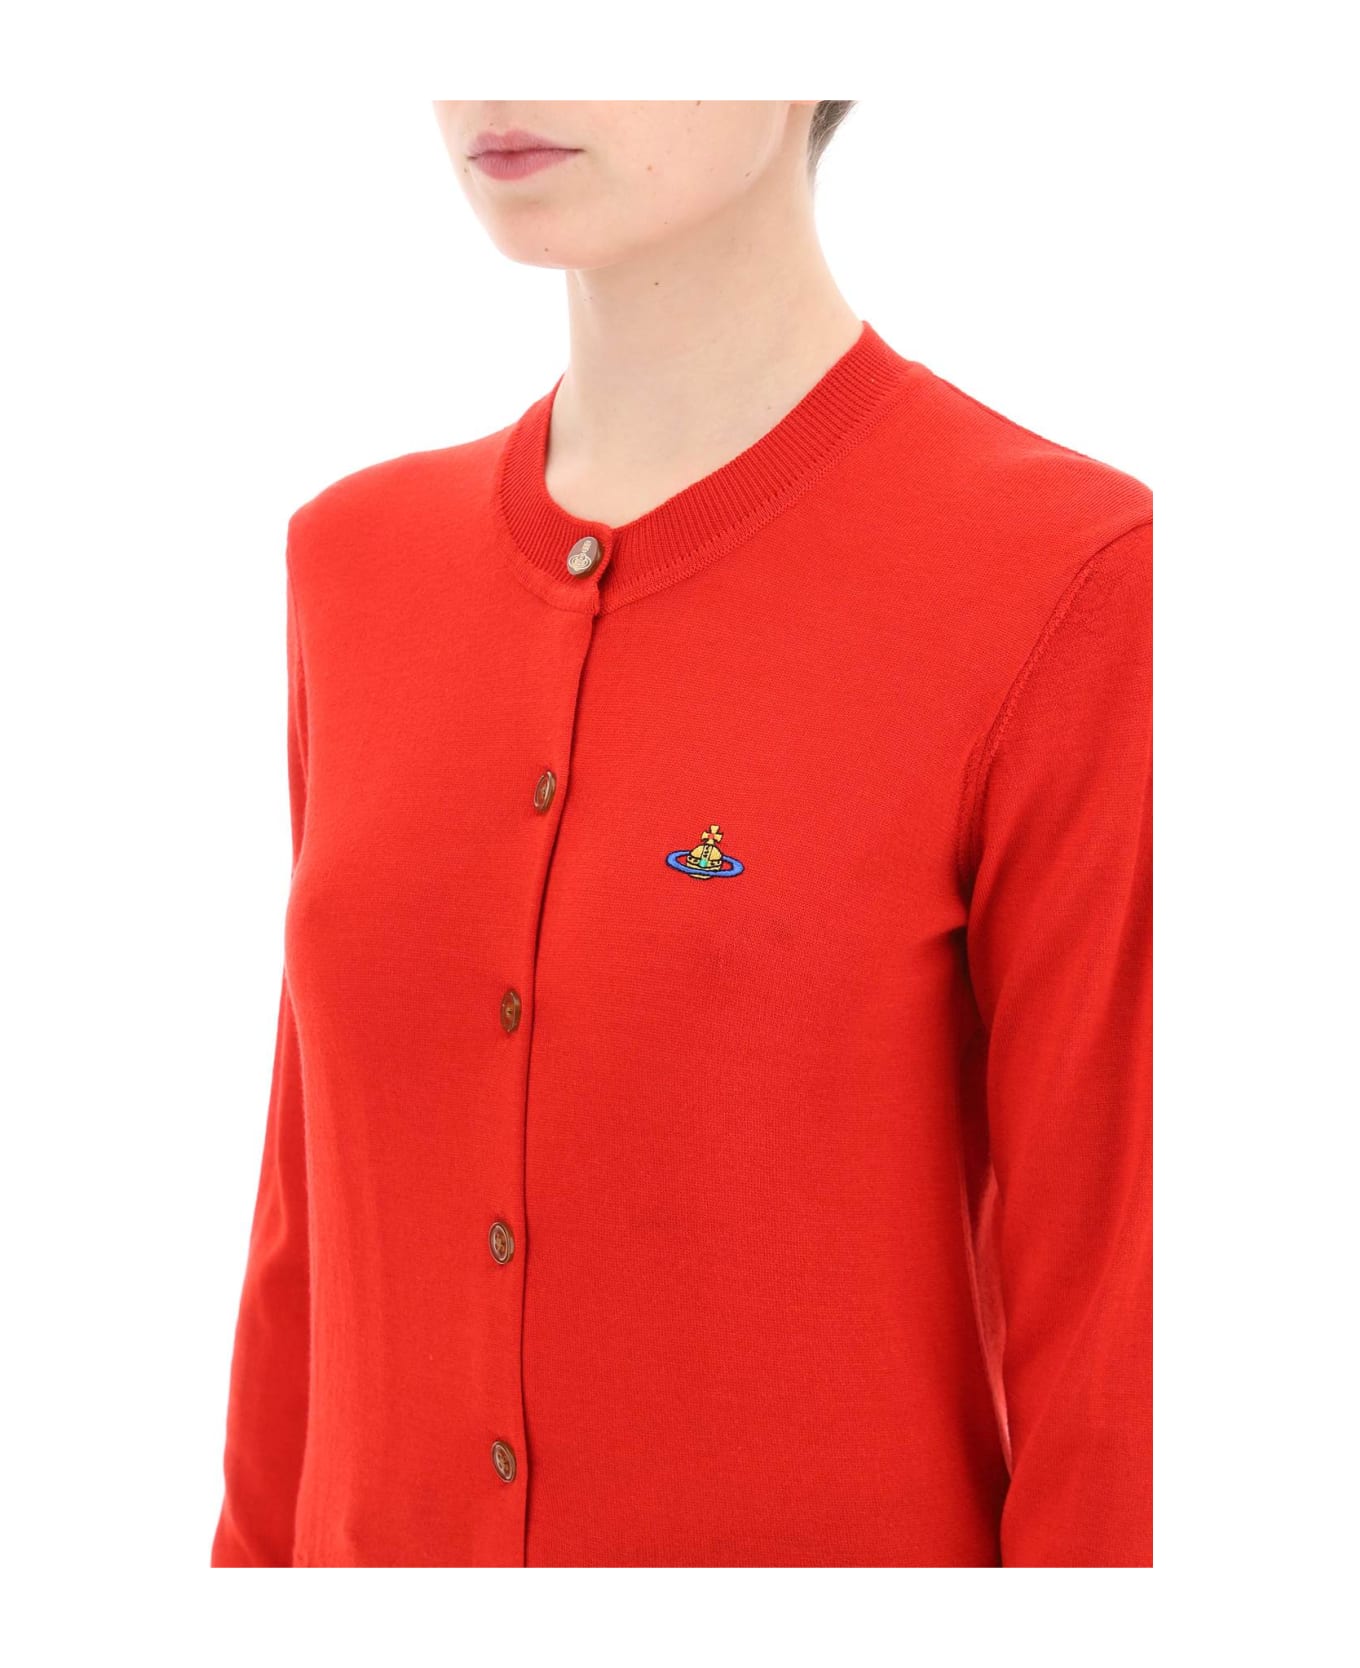 Vivienne Westwood Bea Cardigan With Embroidered Logo - RED (Red) カーディガン